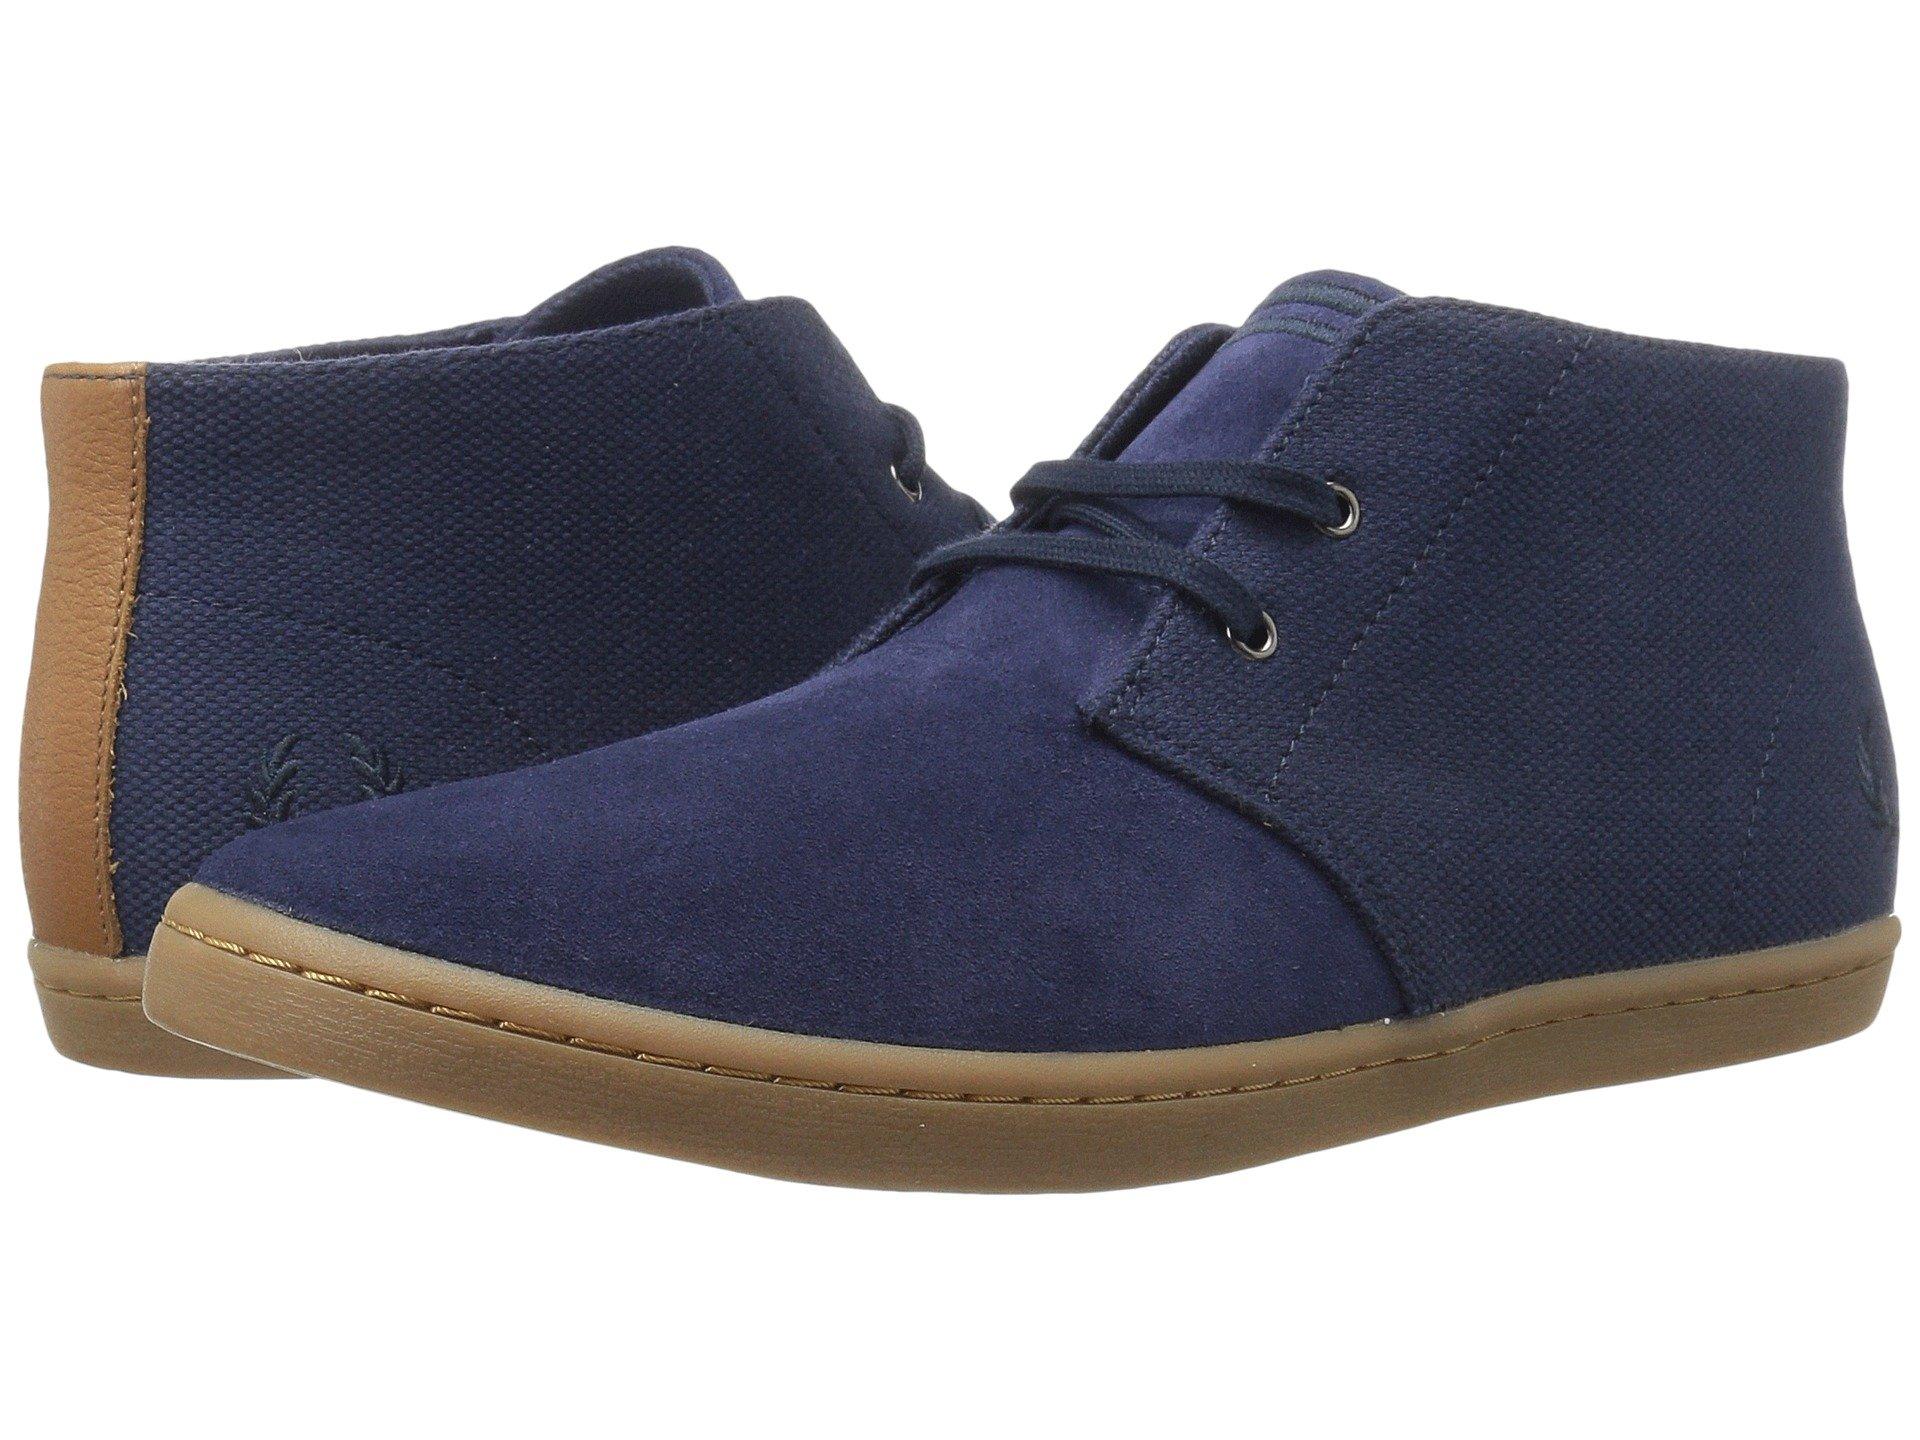 Fred Perry Byron Mid Suede Woven Canvas, Carbon Blue/navy | ModeSens